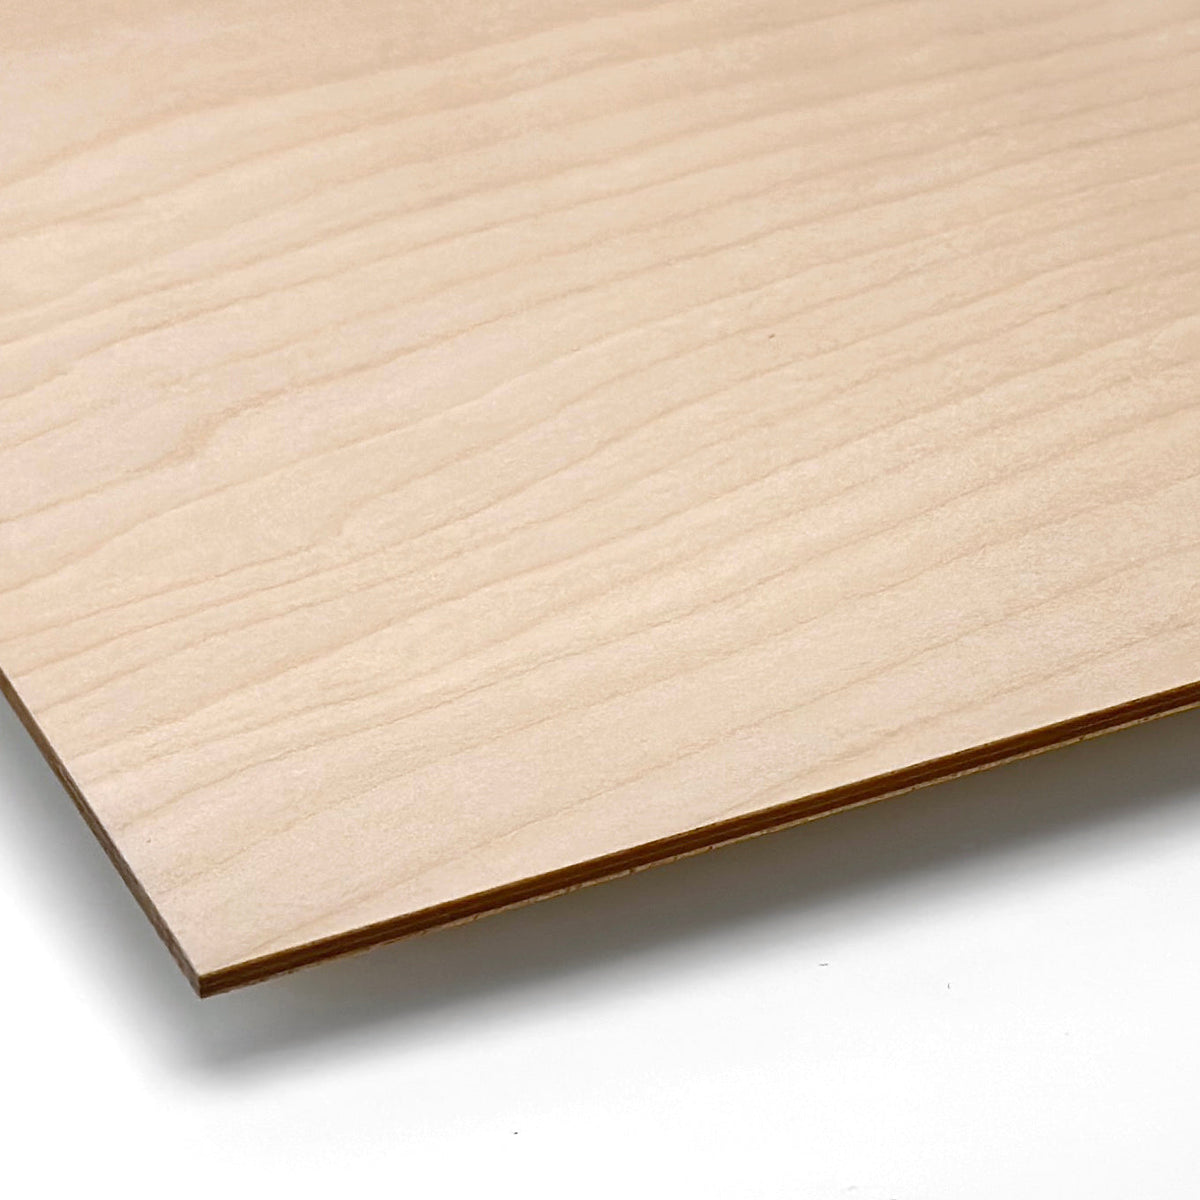 3mm Birch plywood with laser cutting & double sided printing - 300x200mm